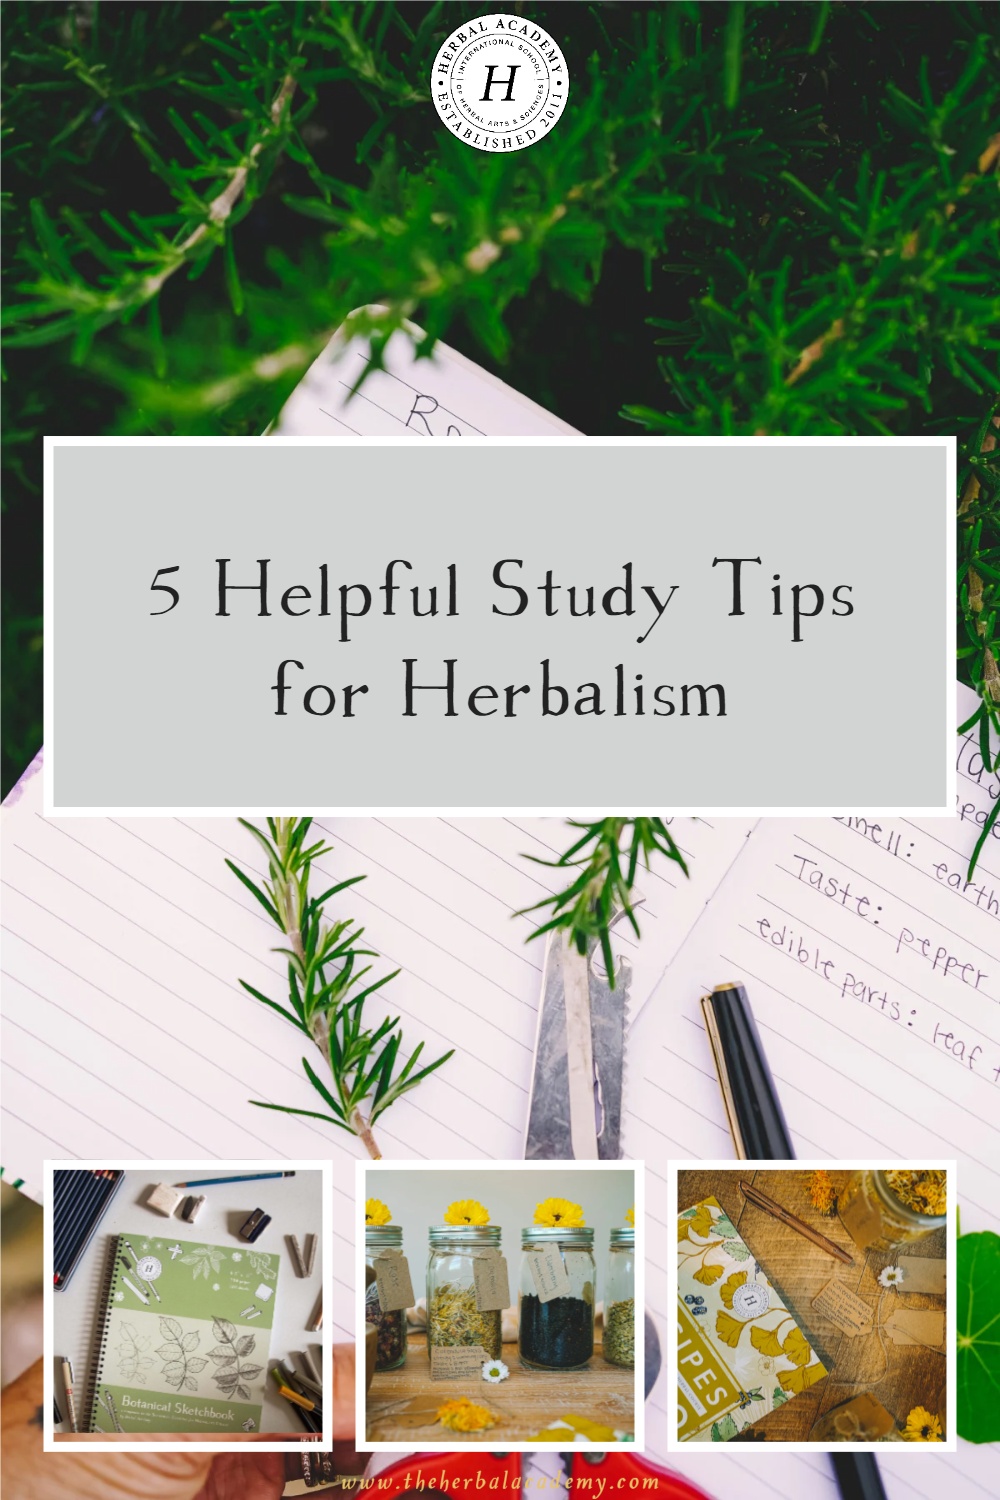 5 Helpful Study Tips for Herbalism | Herbal Academy | These five unique study tips will make your long, wonderful journey of being an herbal student that much more fulfilling.